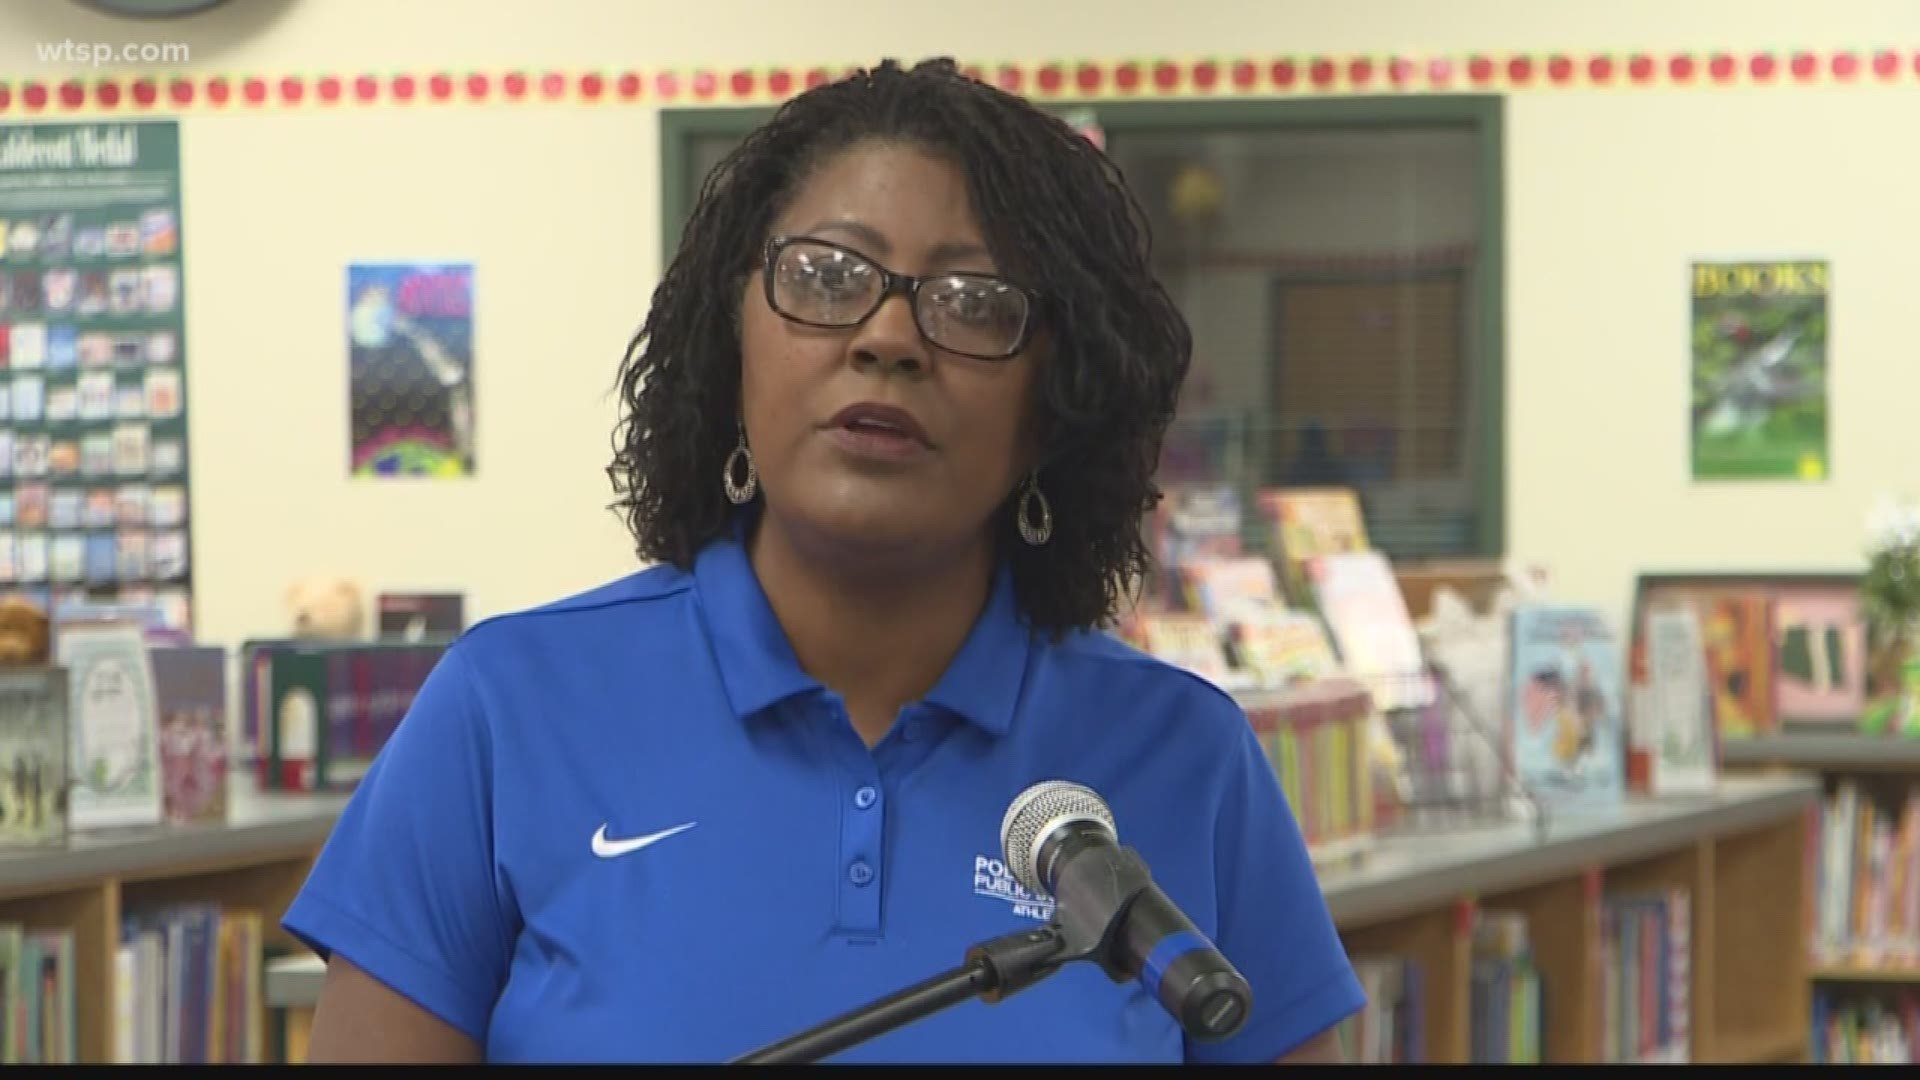 Polk County Schools says its staff is ready for the absences.